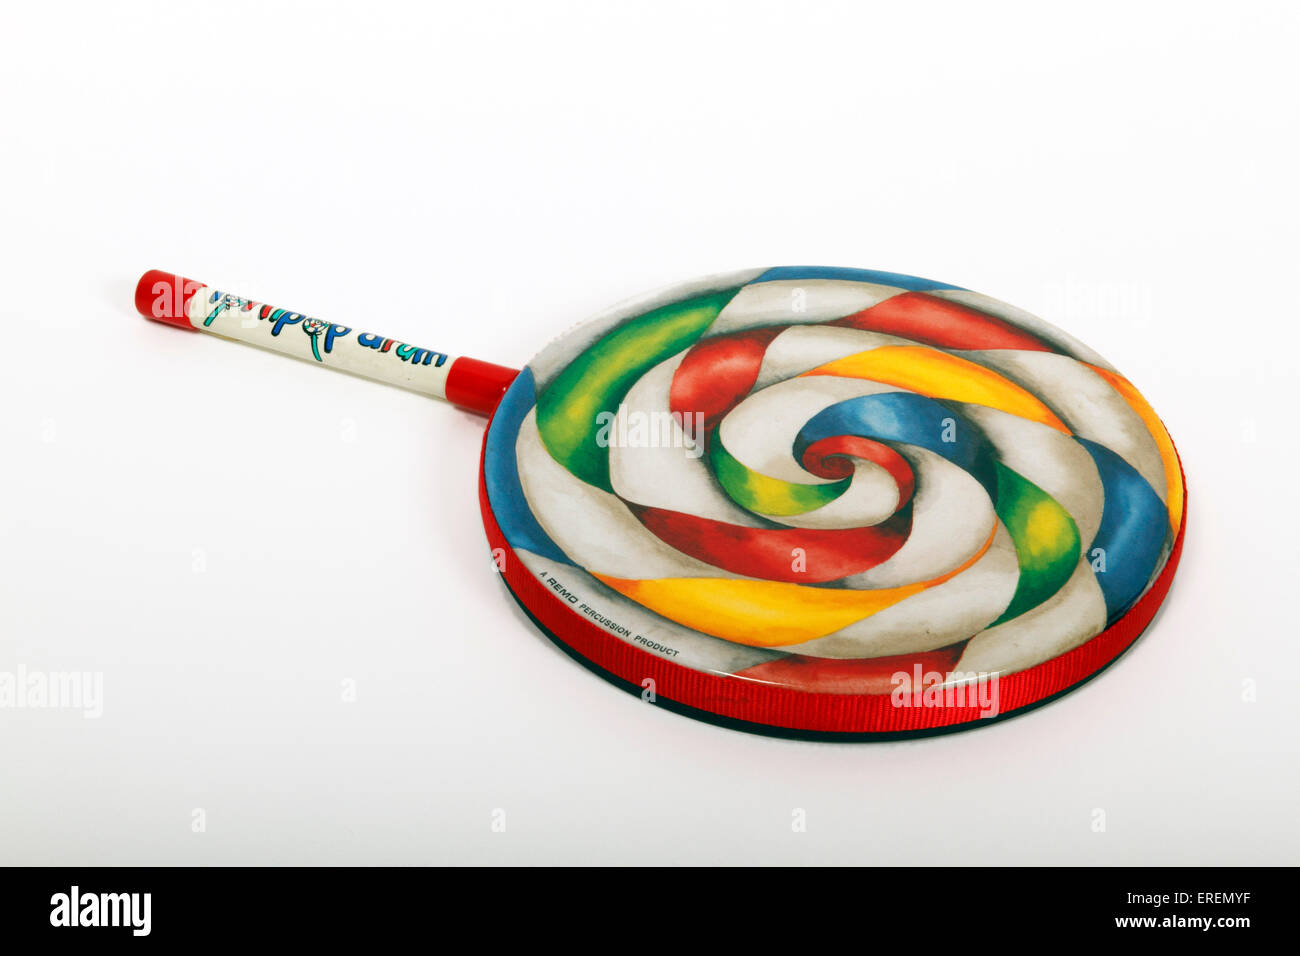 School percussion instrument, Lollipop drum made by Remo for ...